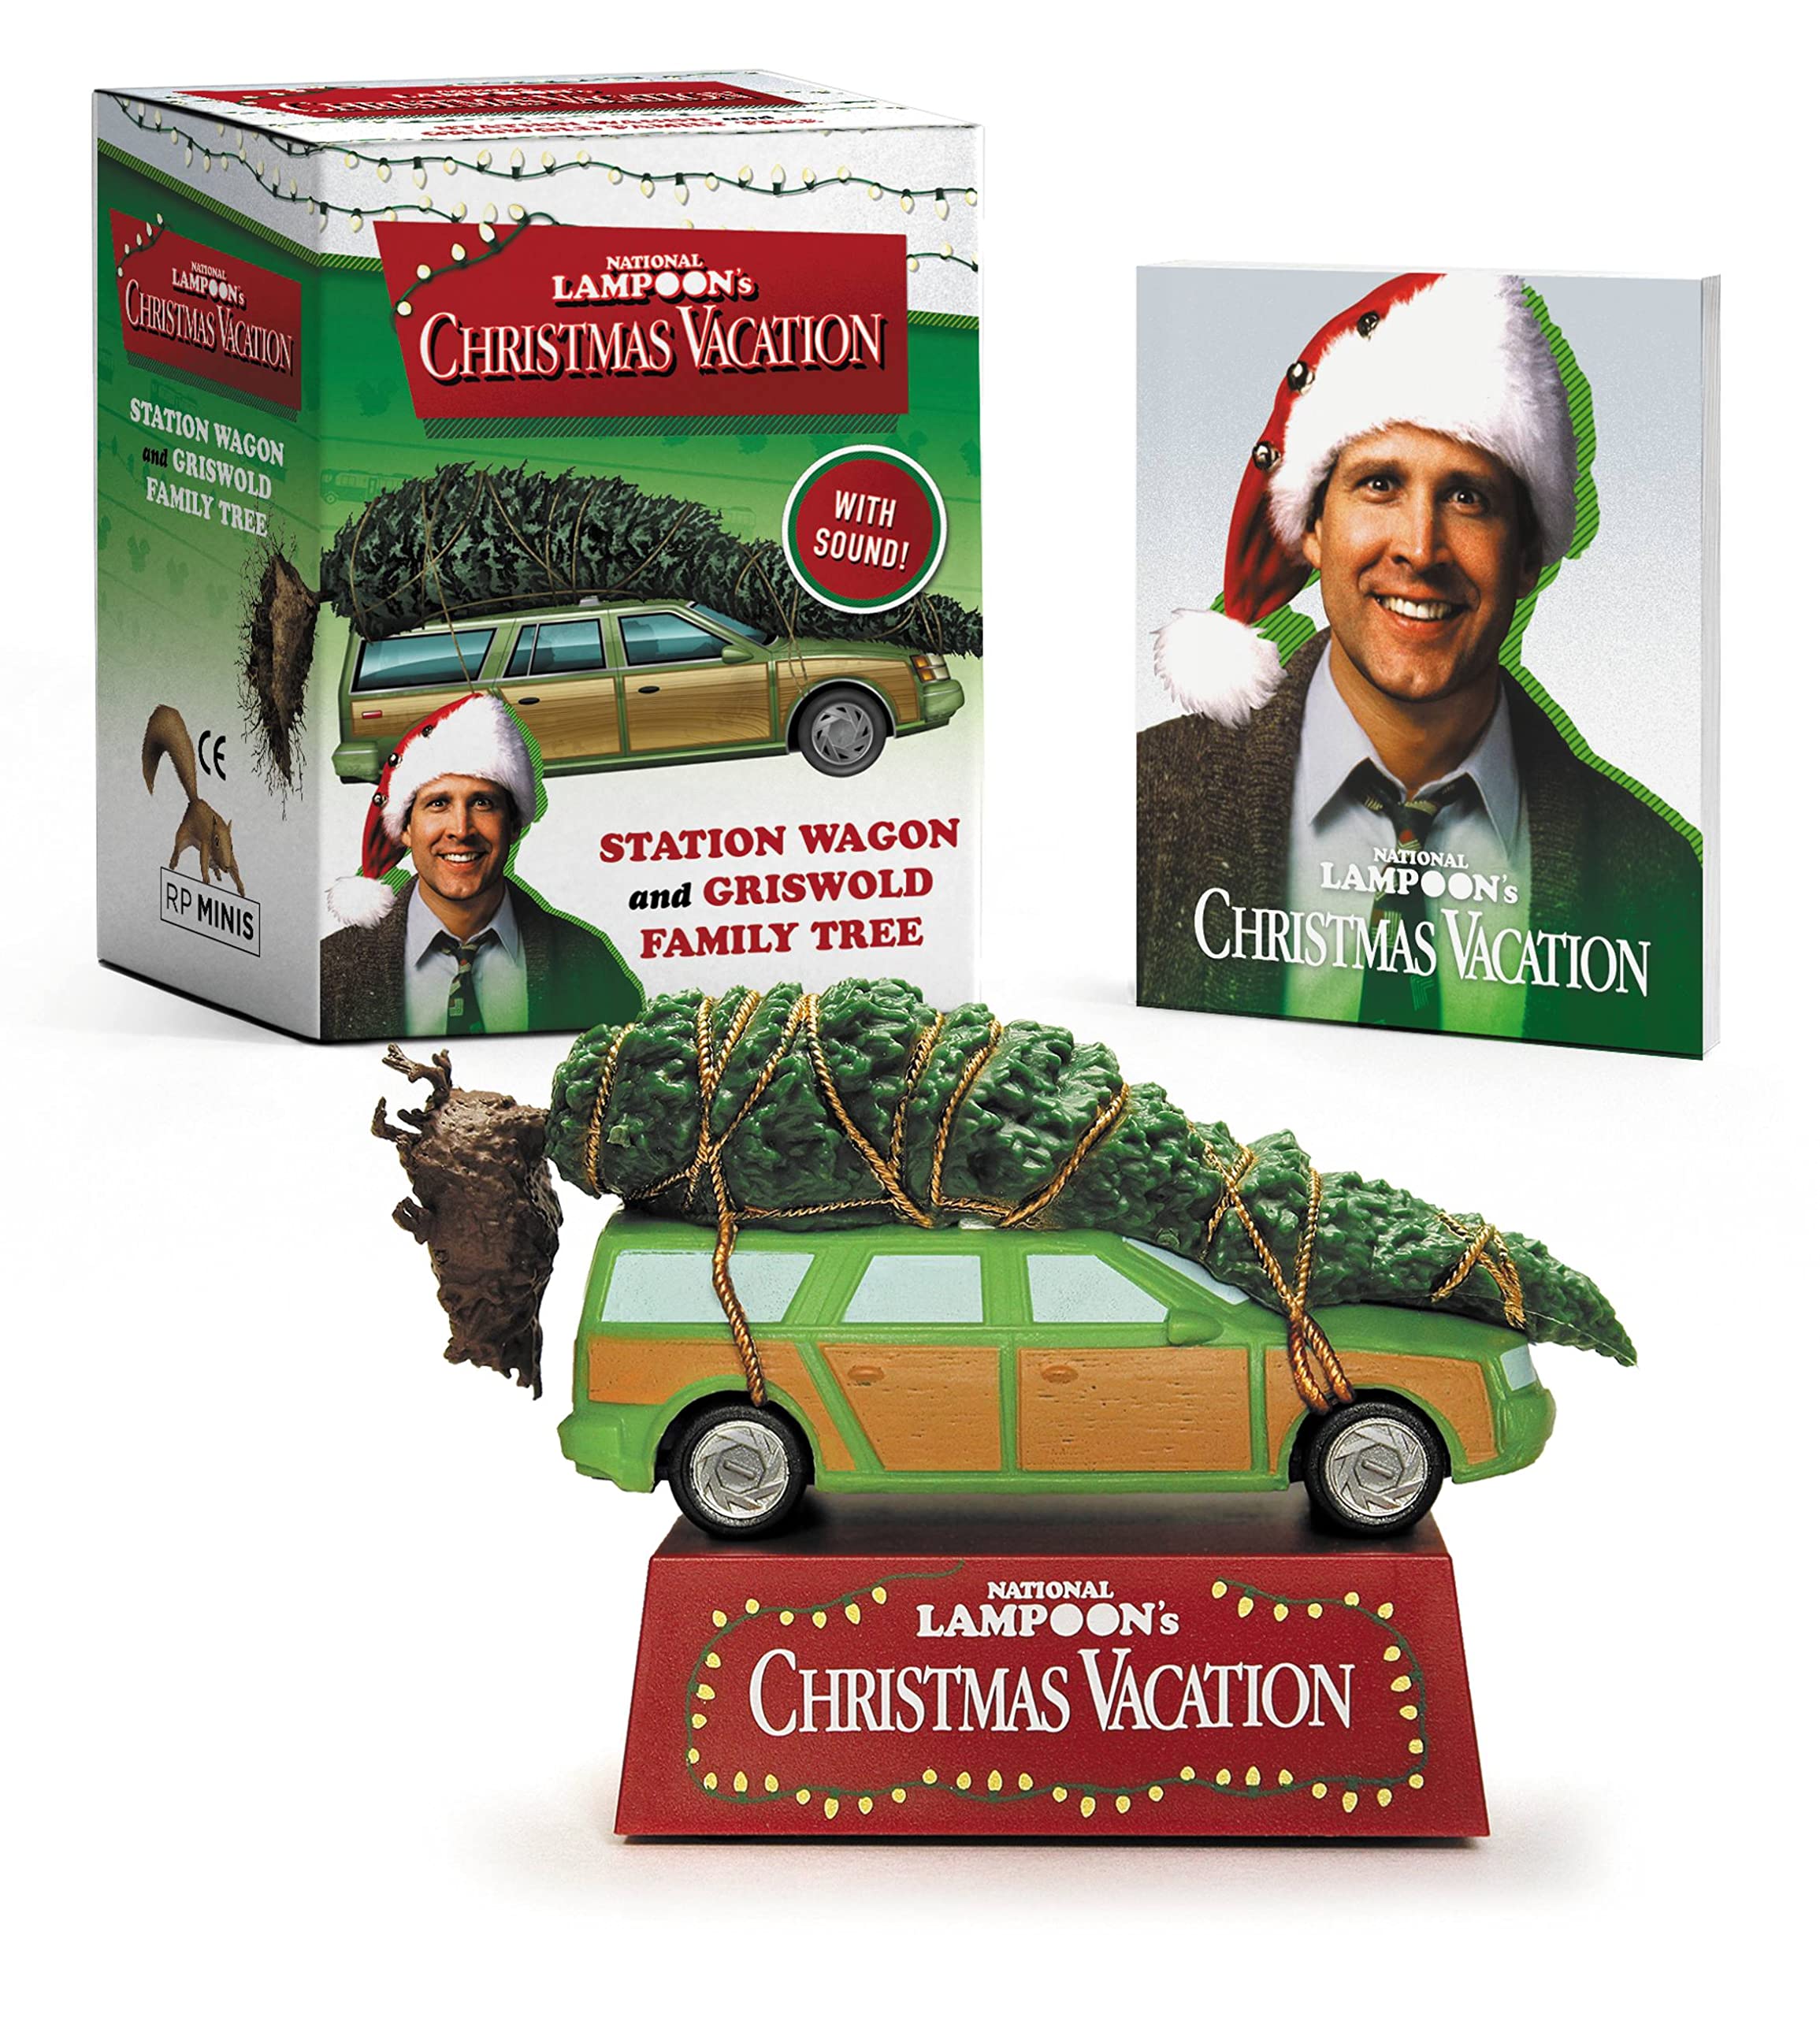 National Lampoons Christmas Vacation: Station Wagon and Griswold Family Tree: With Sound! (Paperback)